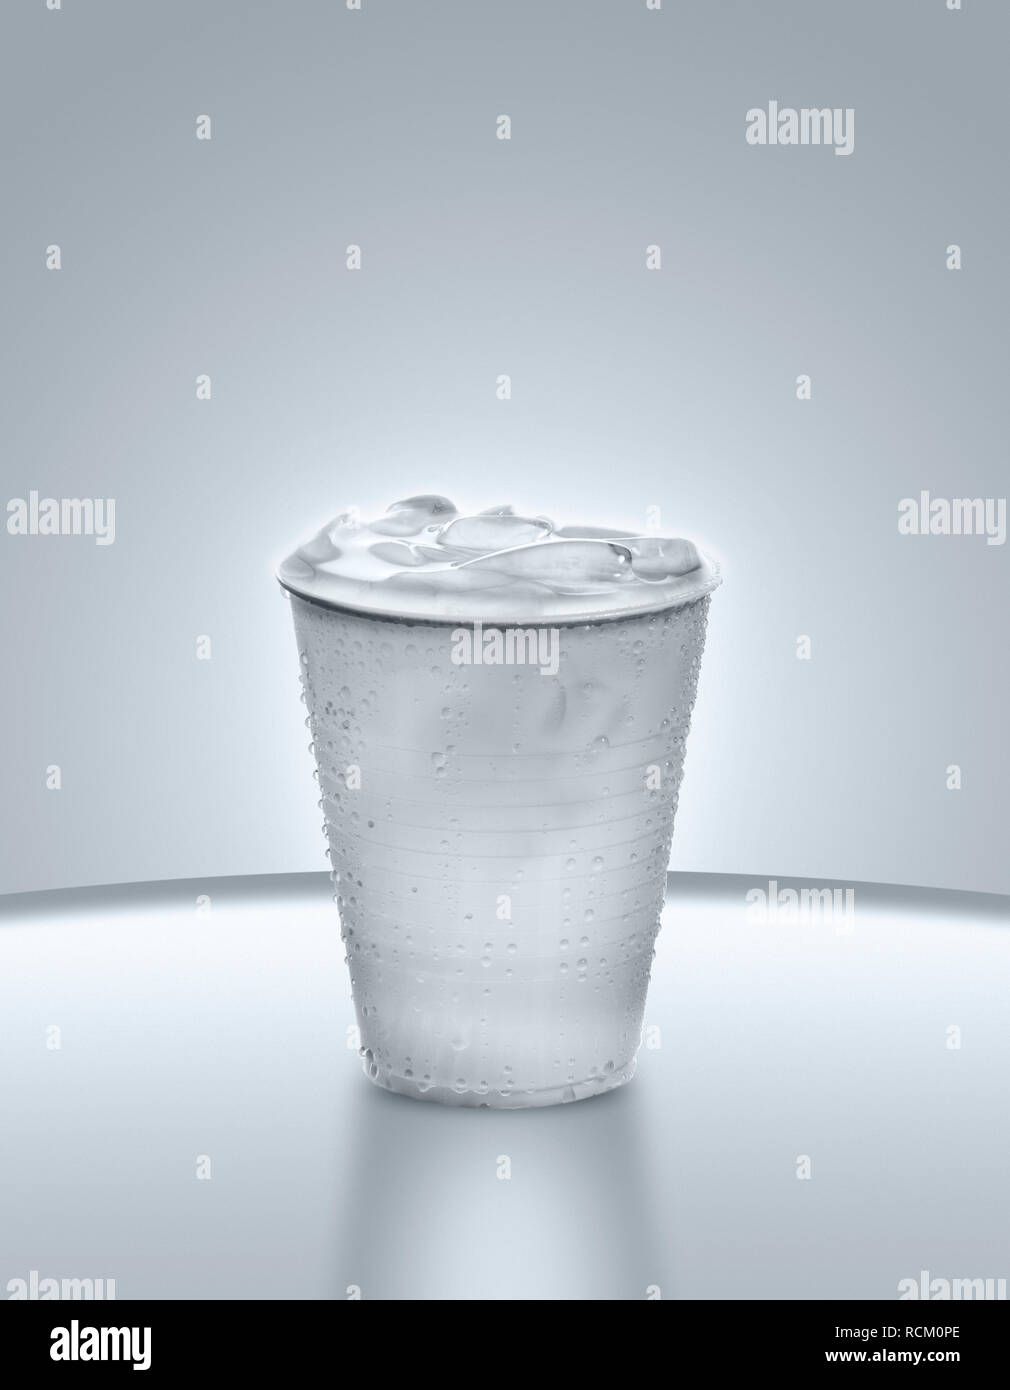 Disposable plastic cup full of water and ice, grey background, close up Stock Photo